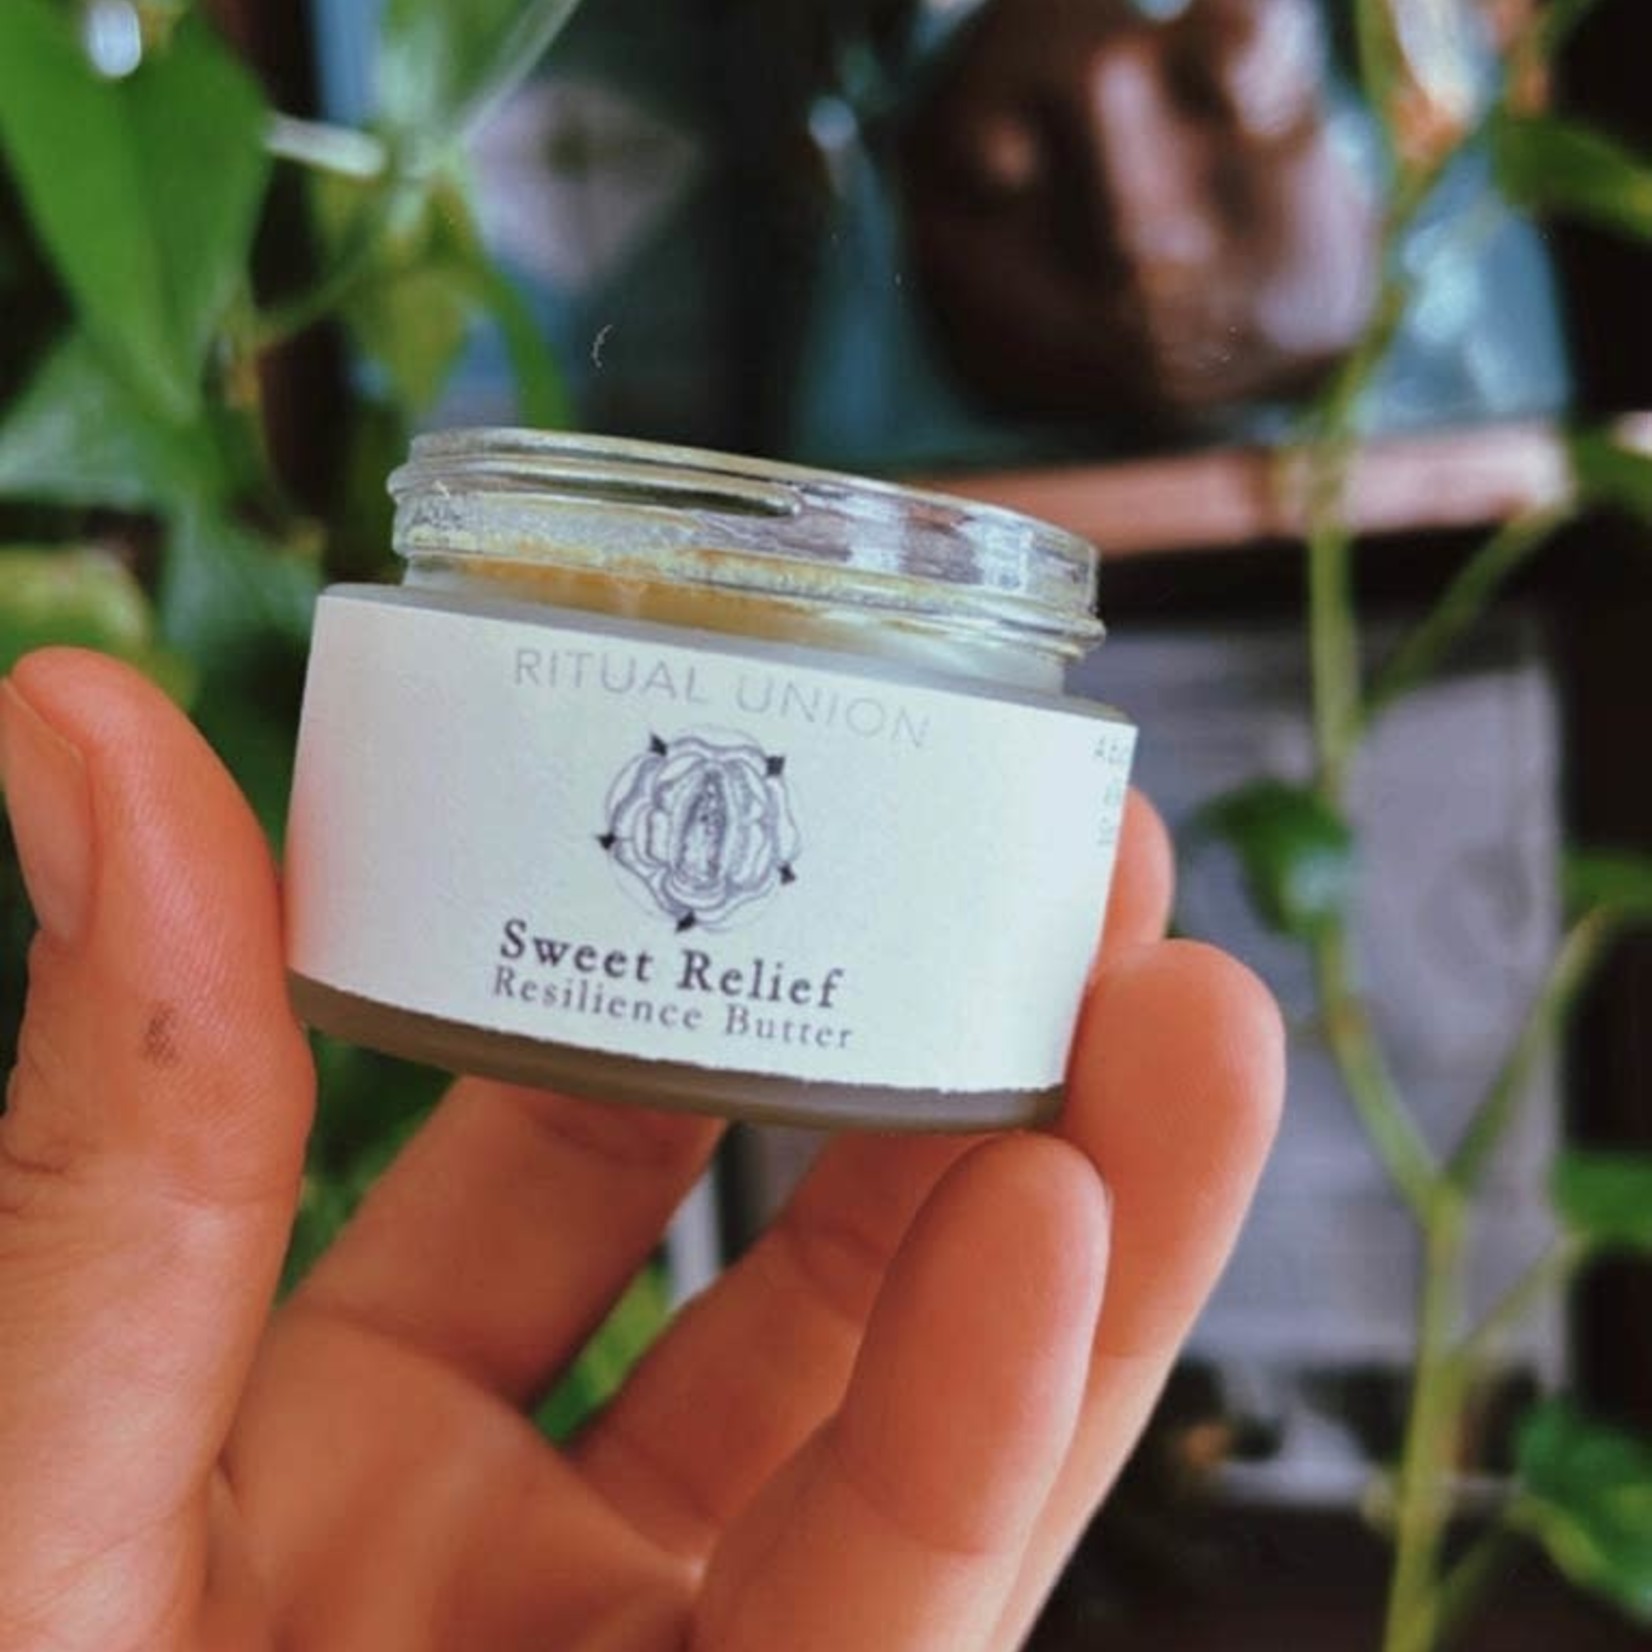 Ritual Union Sweet Relief Resilience Butter by Ritual Union